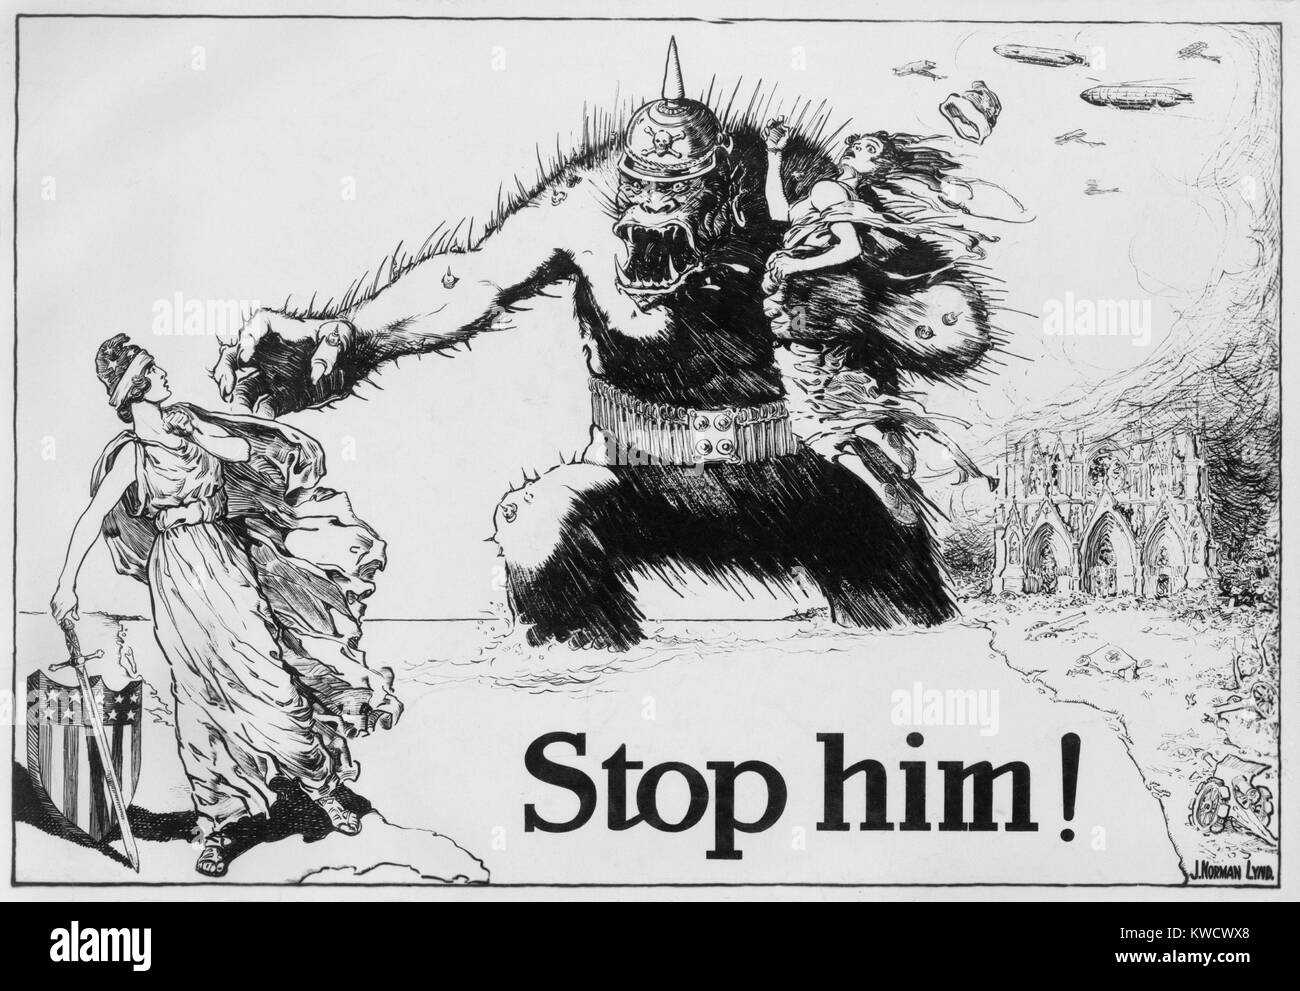 STOP HIM! Fierce gorilla wearing a German spiked helmet, reaches across the ocean from Europe. He threatens the figure of Liberty standing on a map of the American east coast. Drawing for a political cartoon by Norman Lynd, c. 1917 (BSLOC 2017 1 44) Stock Photo